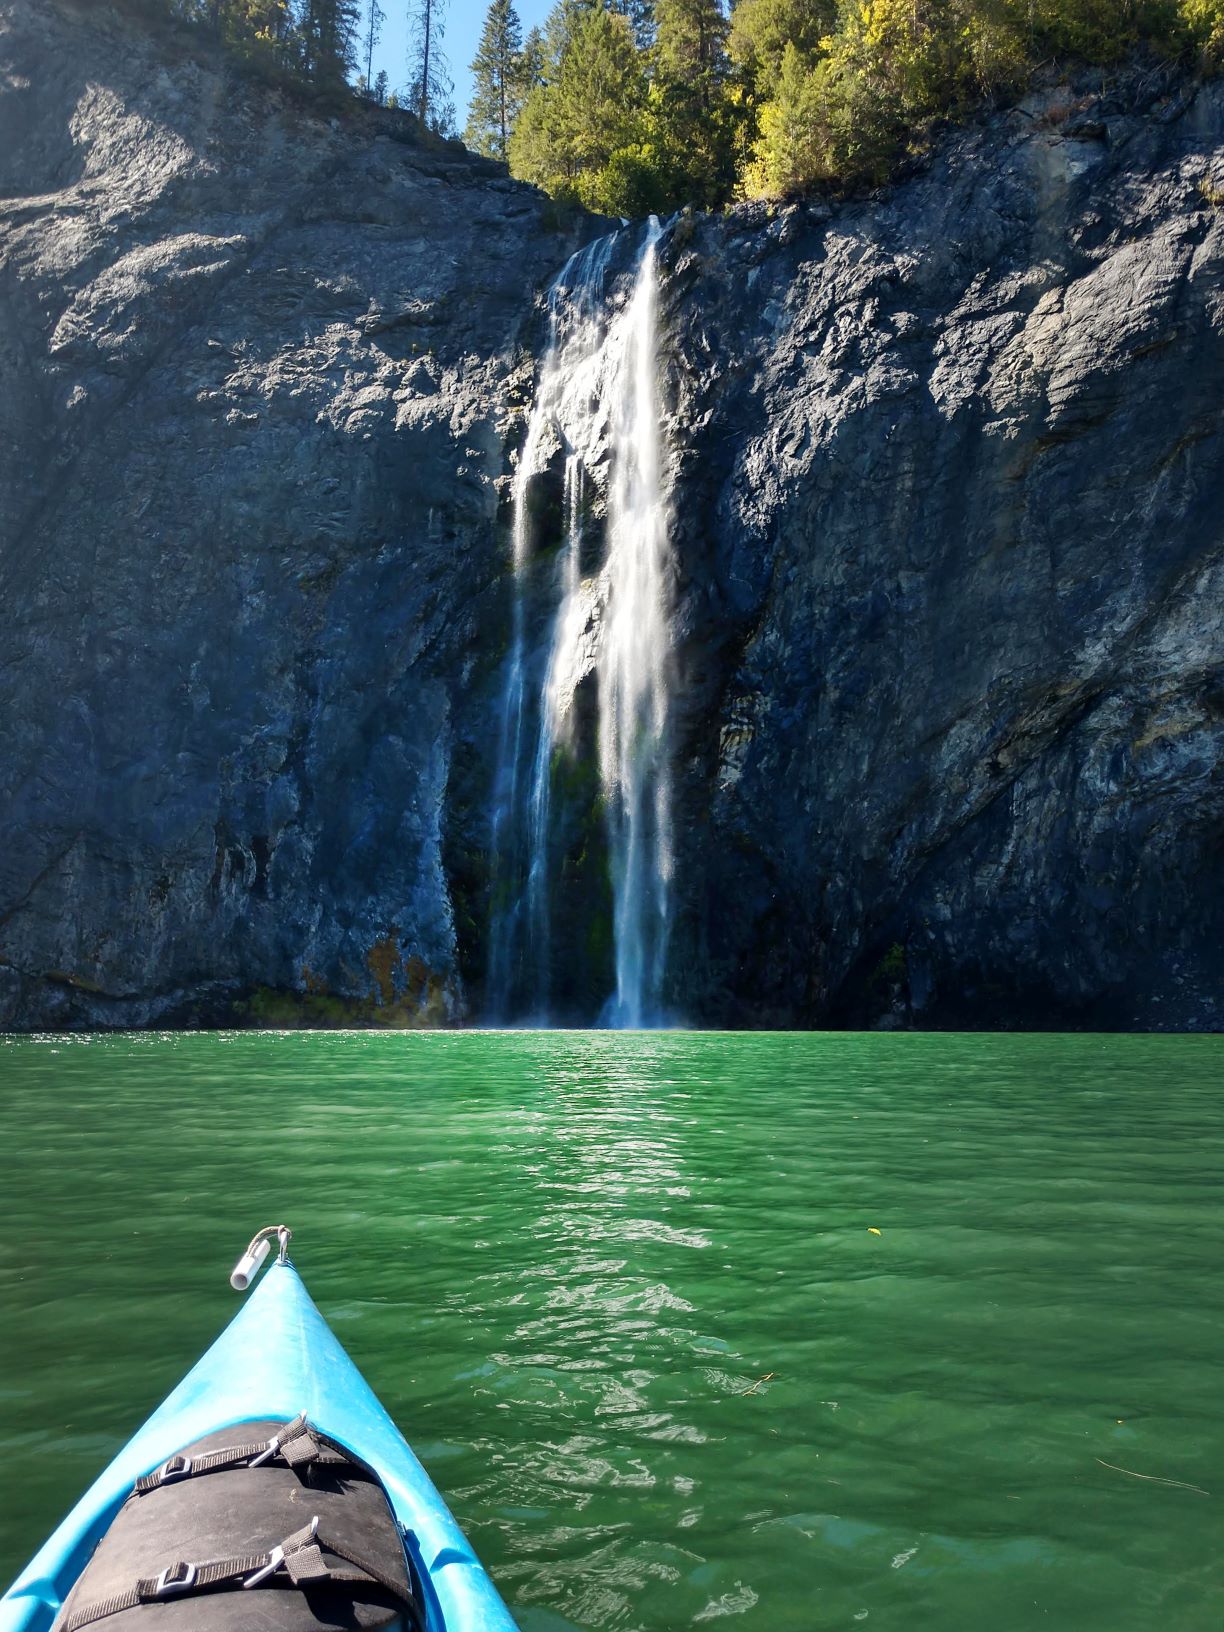 View from a kayak of waterfall, Peewee Falls, over basalt rock into the Pend Oreille River.